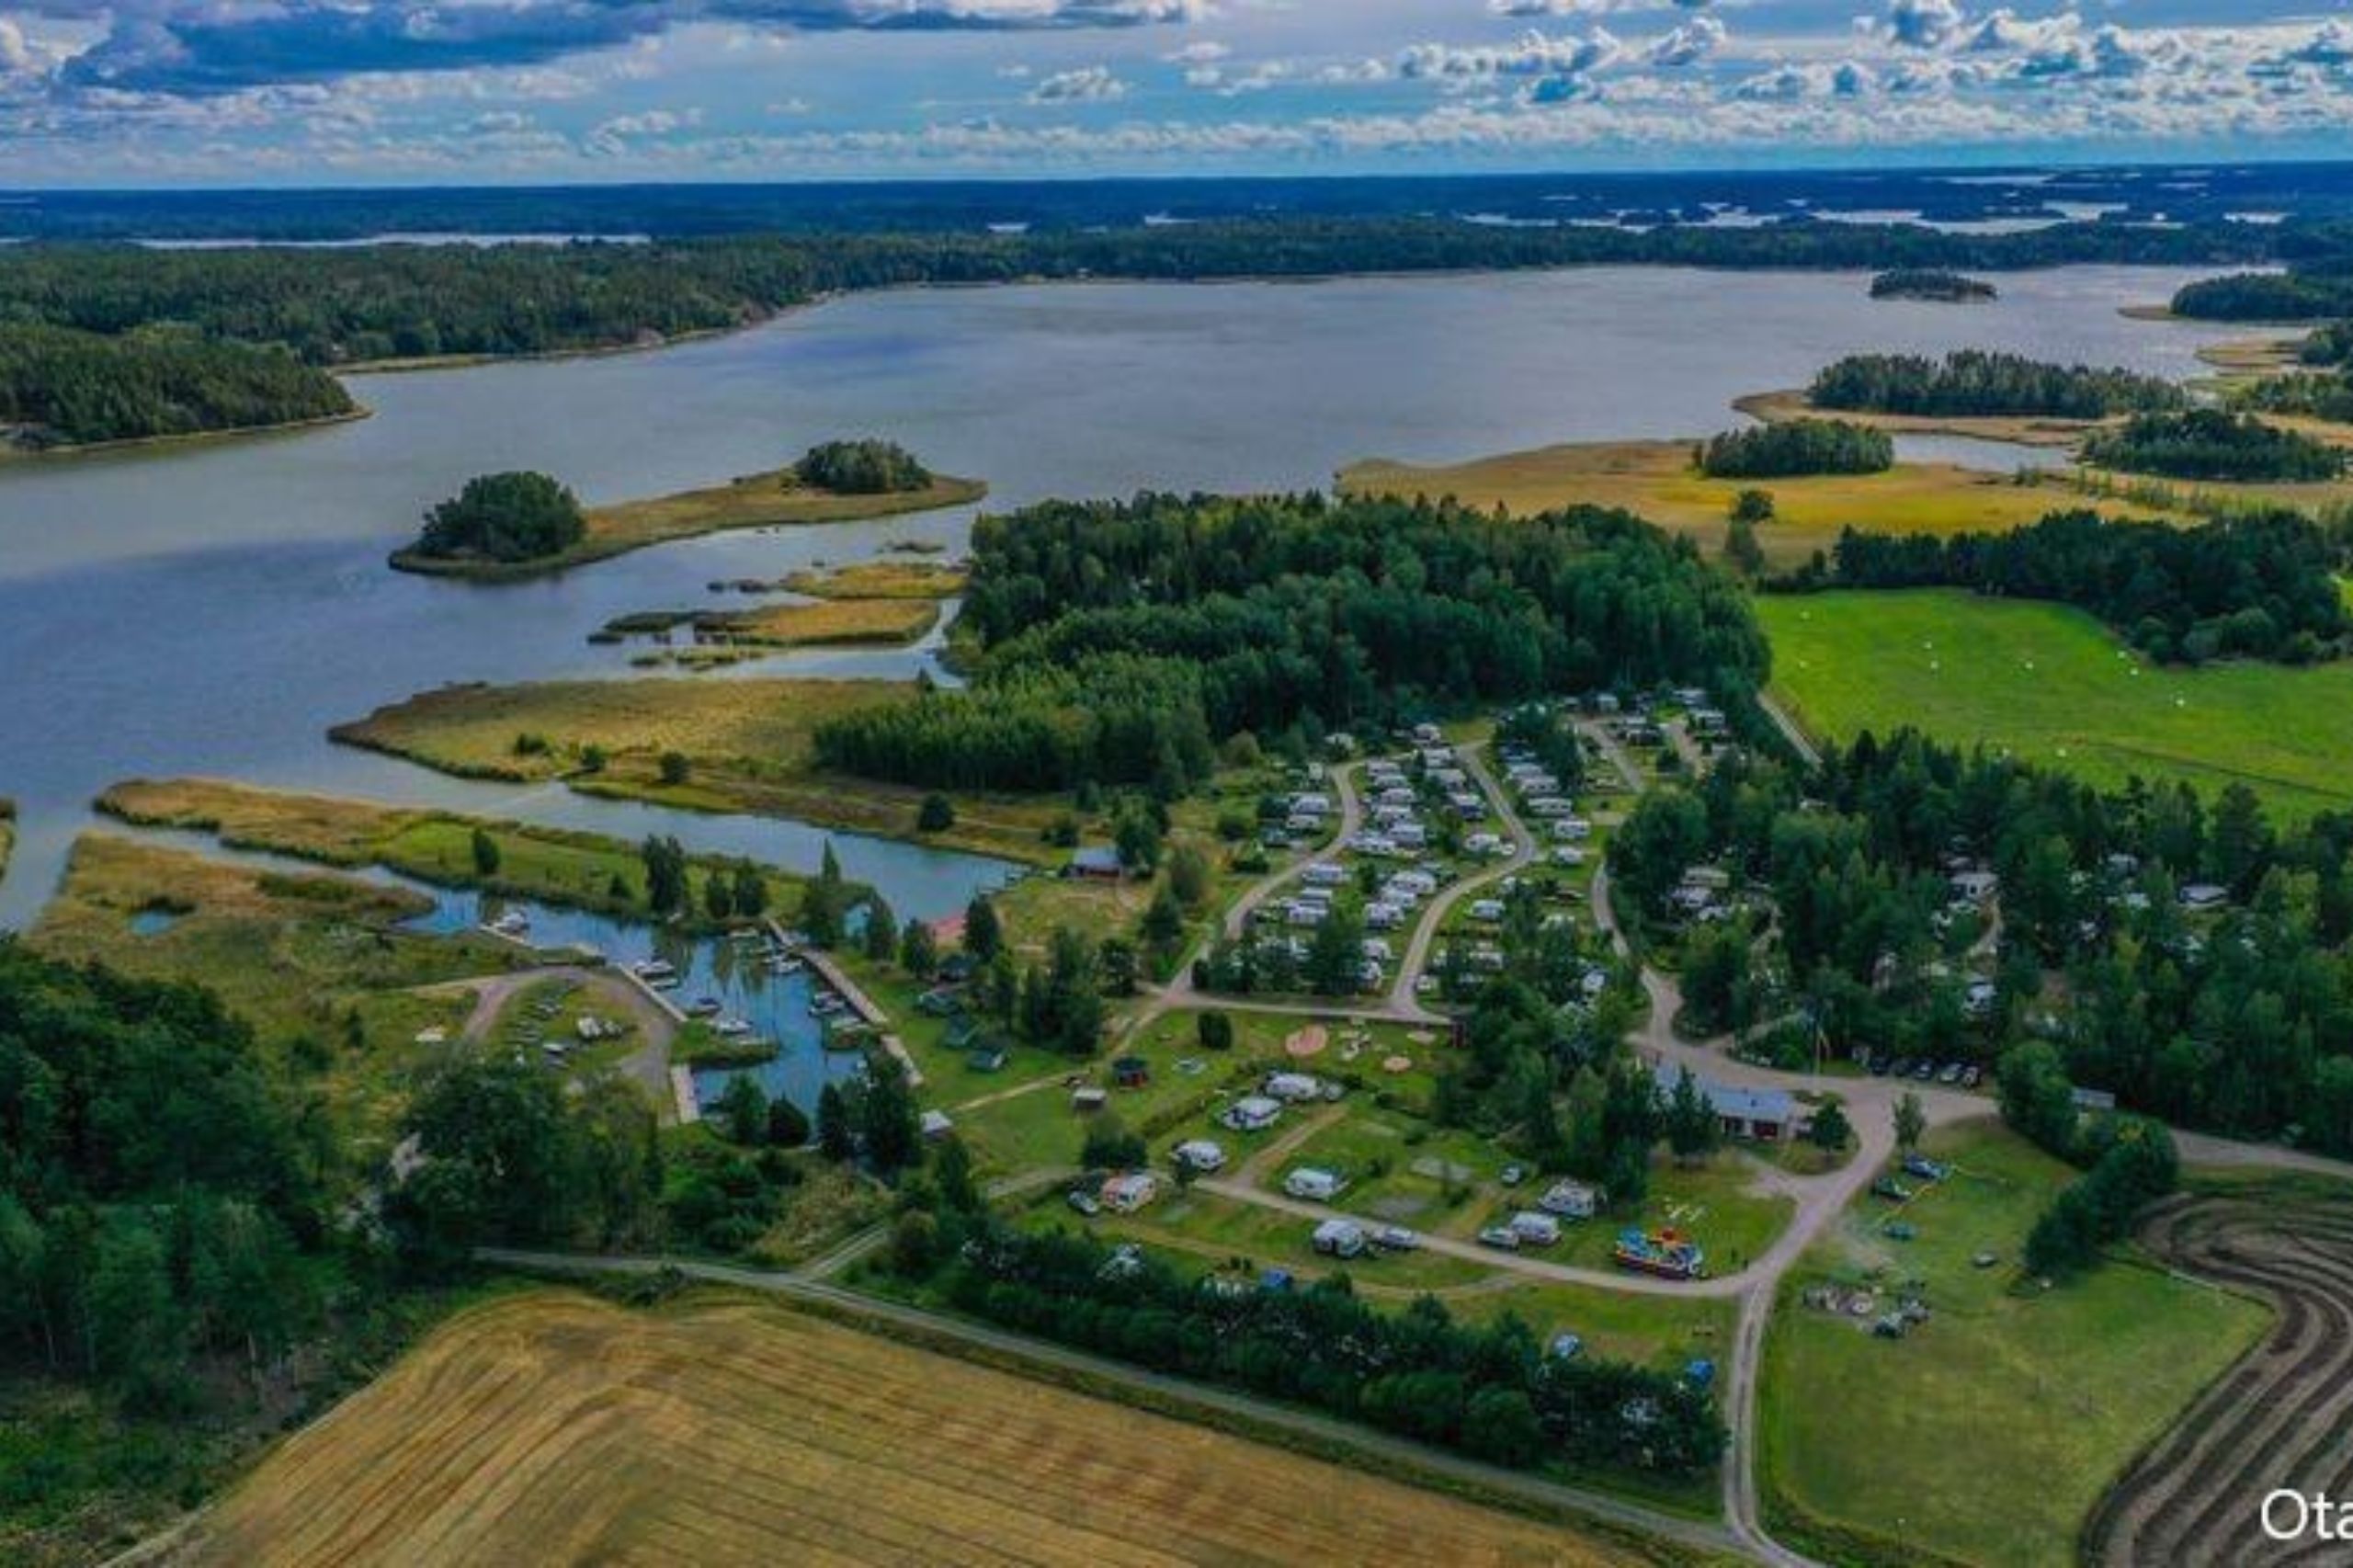 Livonsaari Caravan in Finland is beautifully located right by the archipelago. 